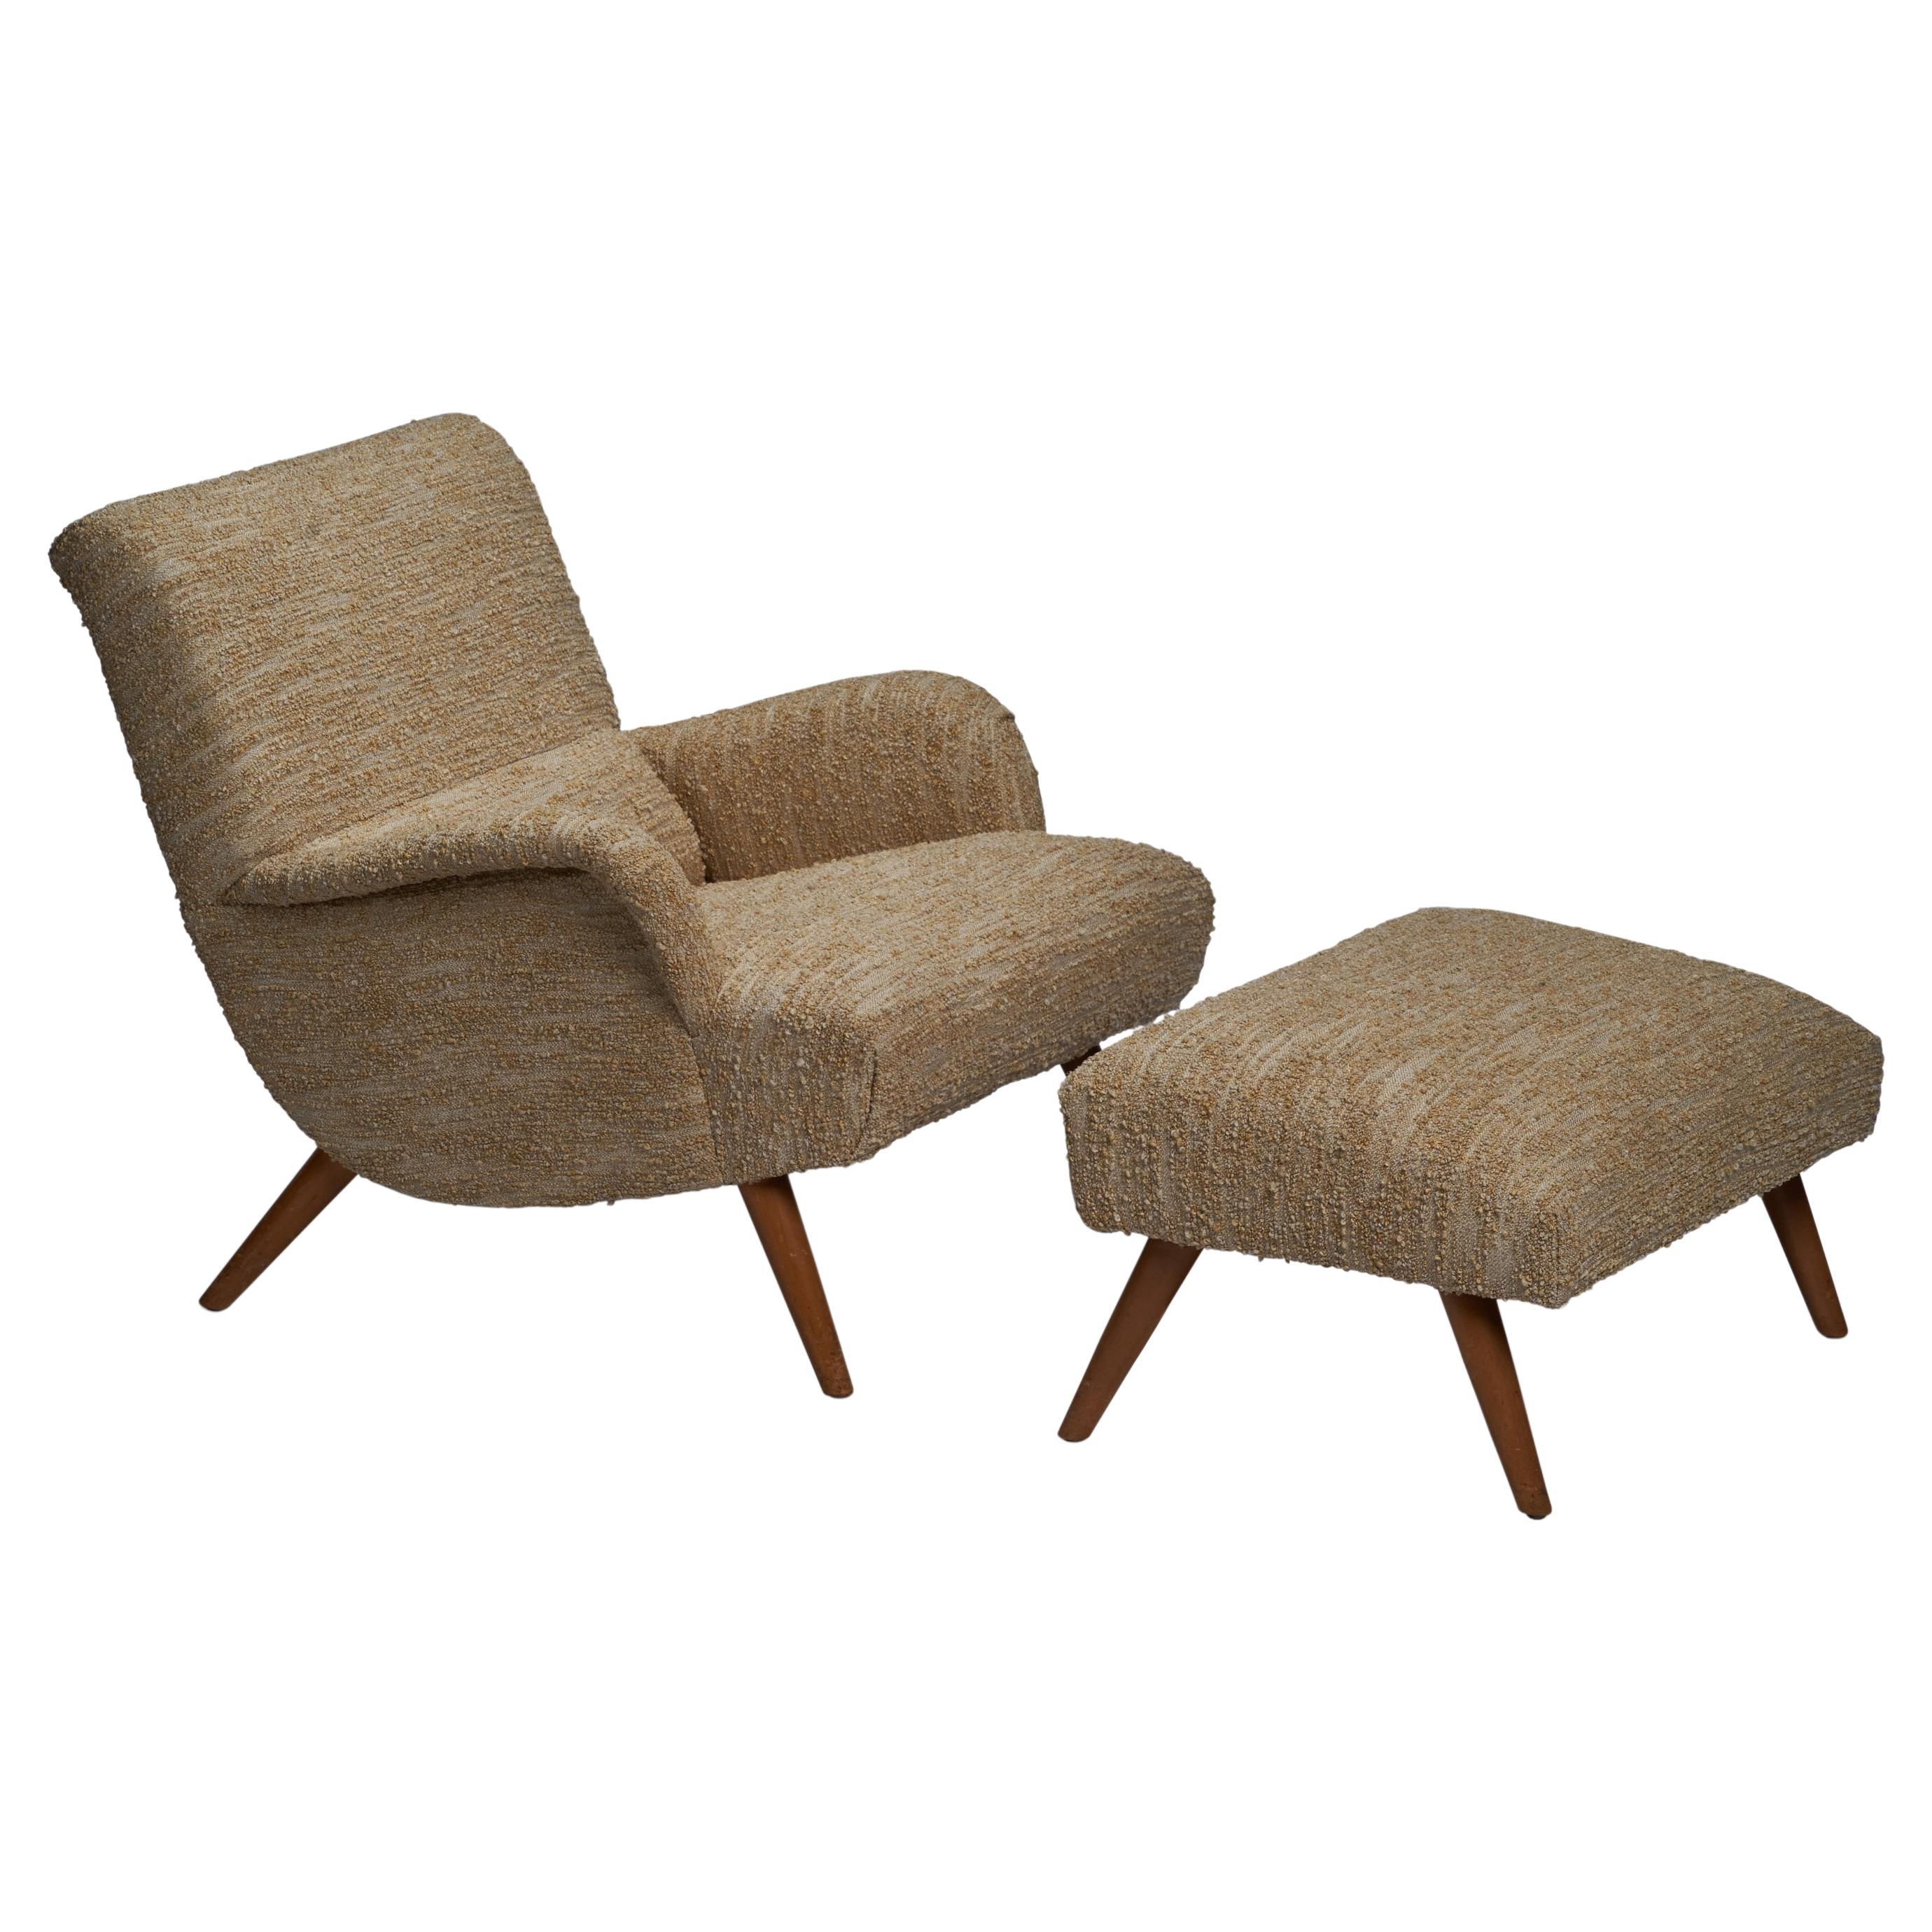 Lawrence Peabody, Lounge Chair and Ottoman,  Fabric, Oak, USA, 1950s For Sale